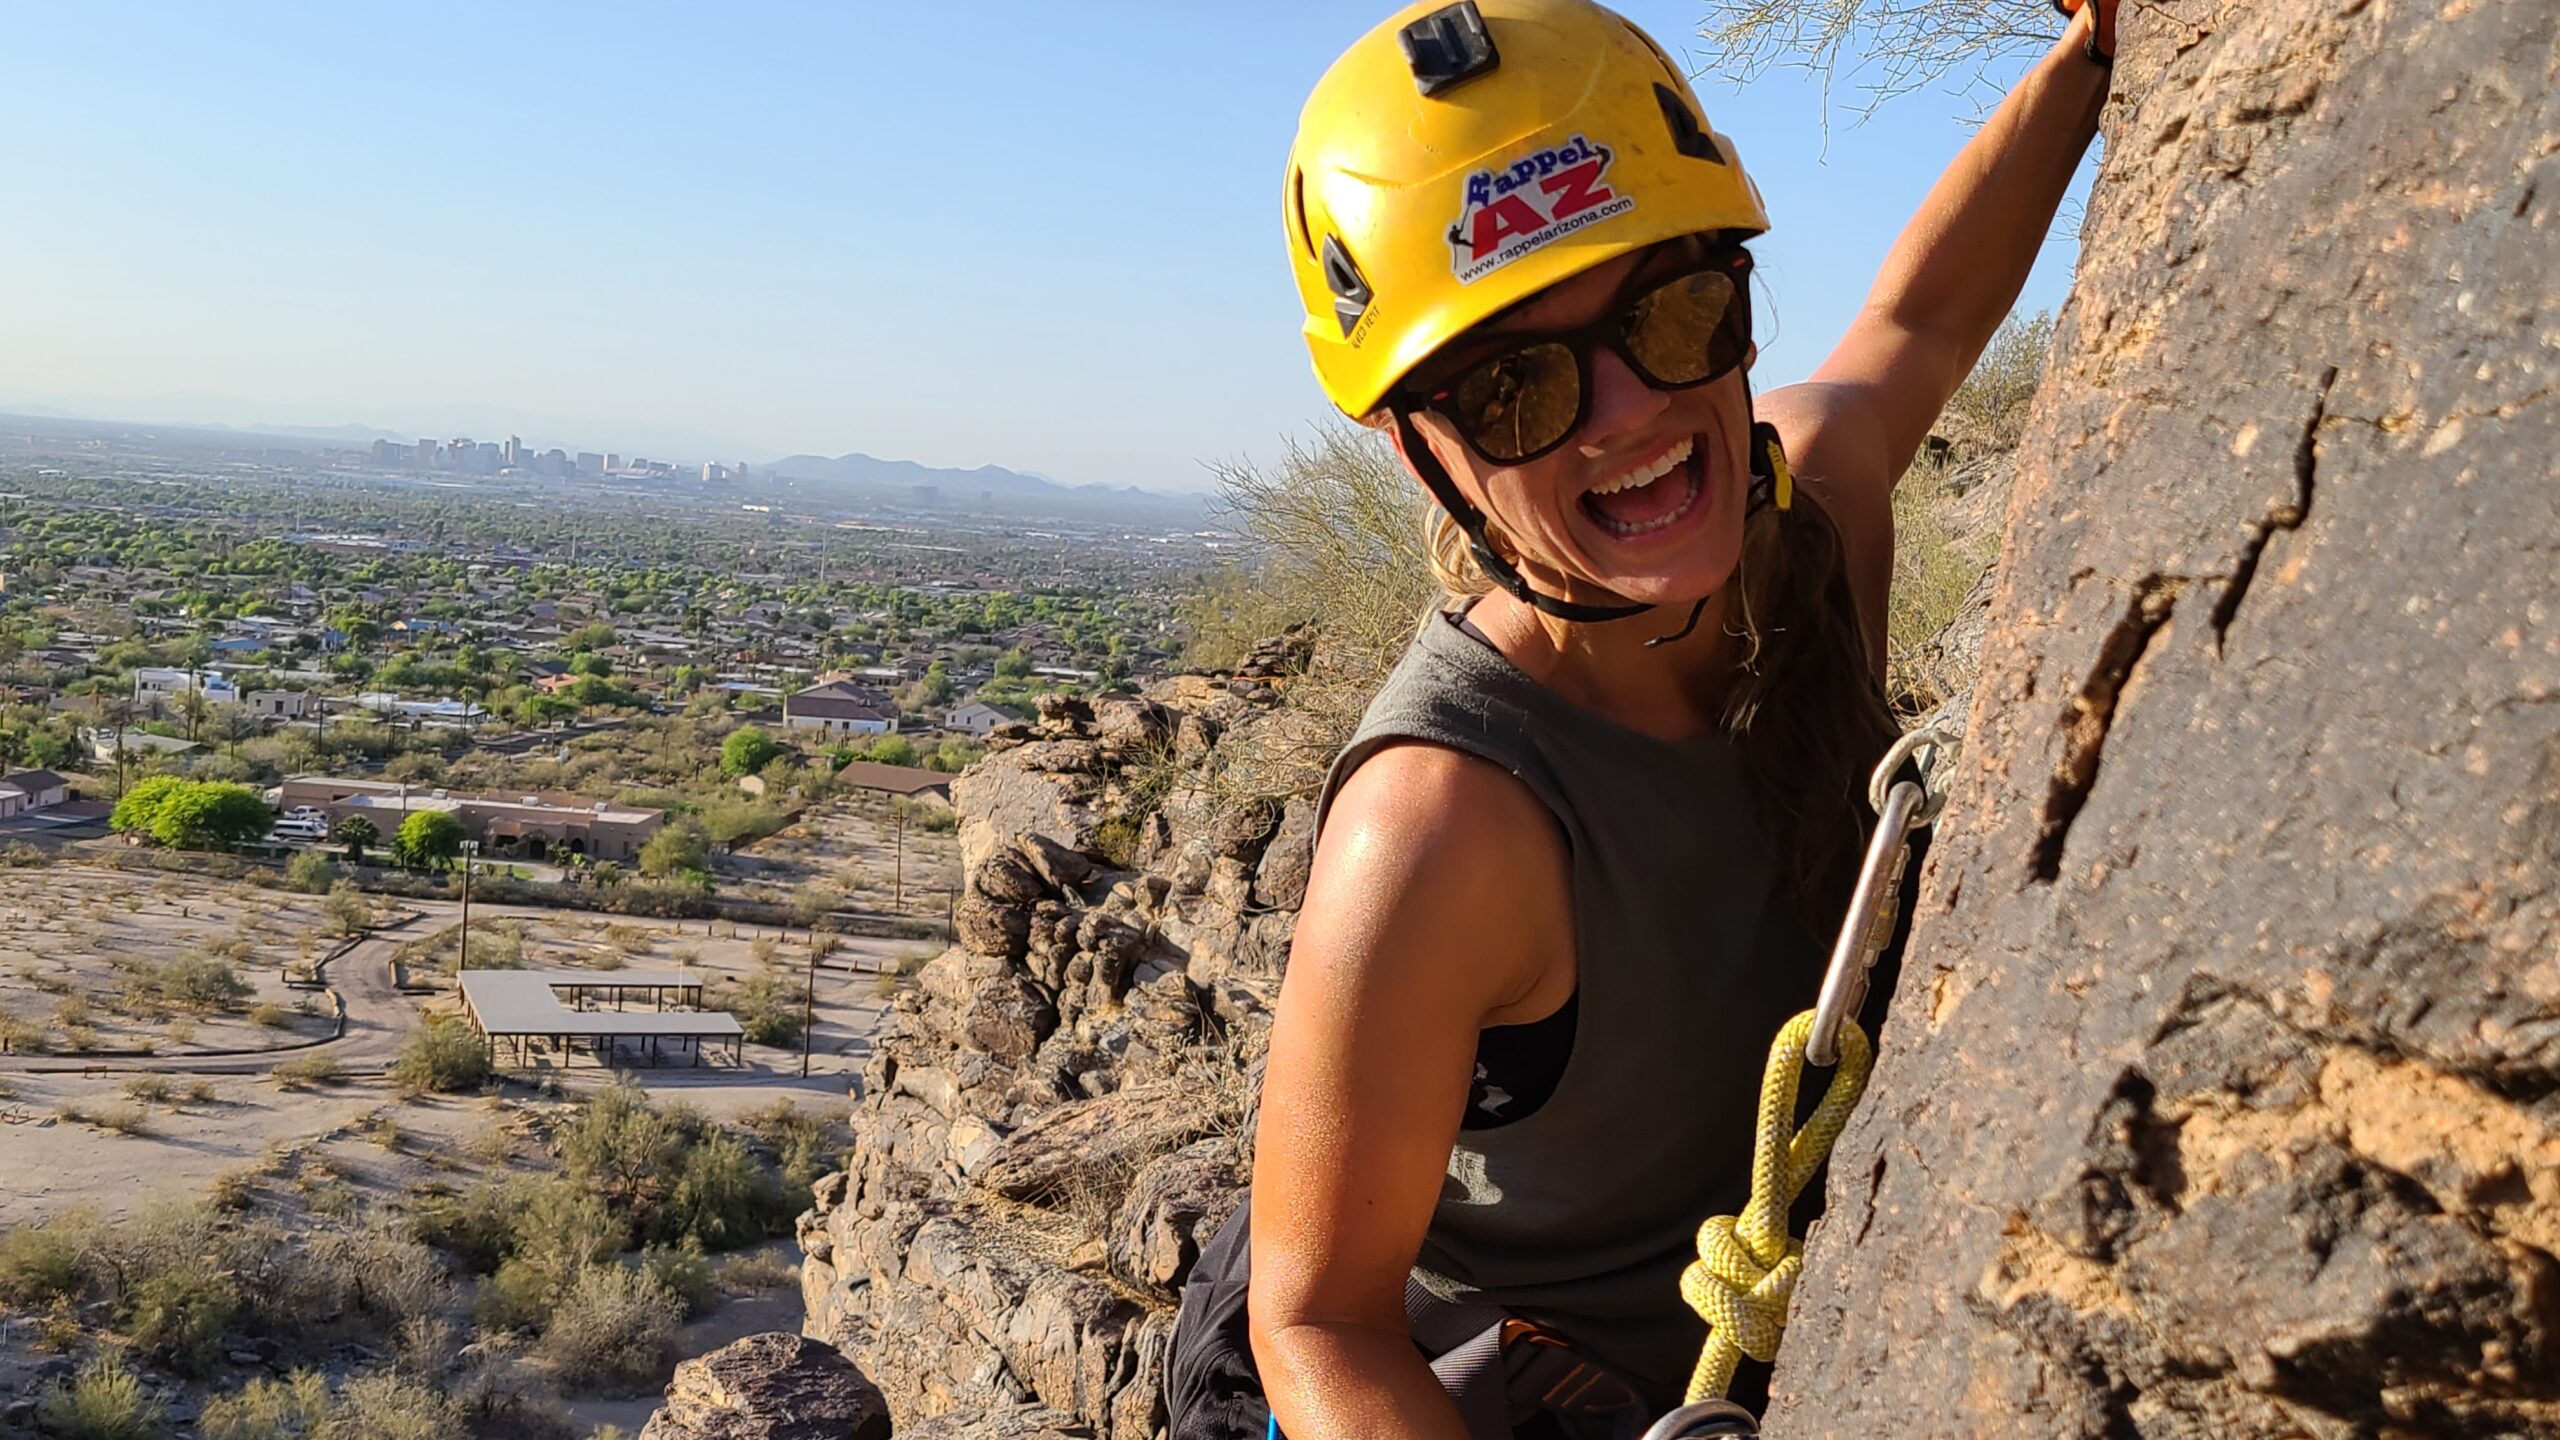 Rock Climbing in Arizona: In Search of New Frontiers